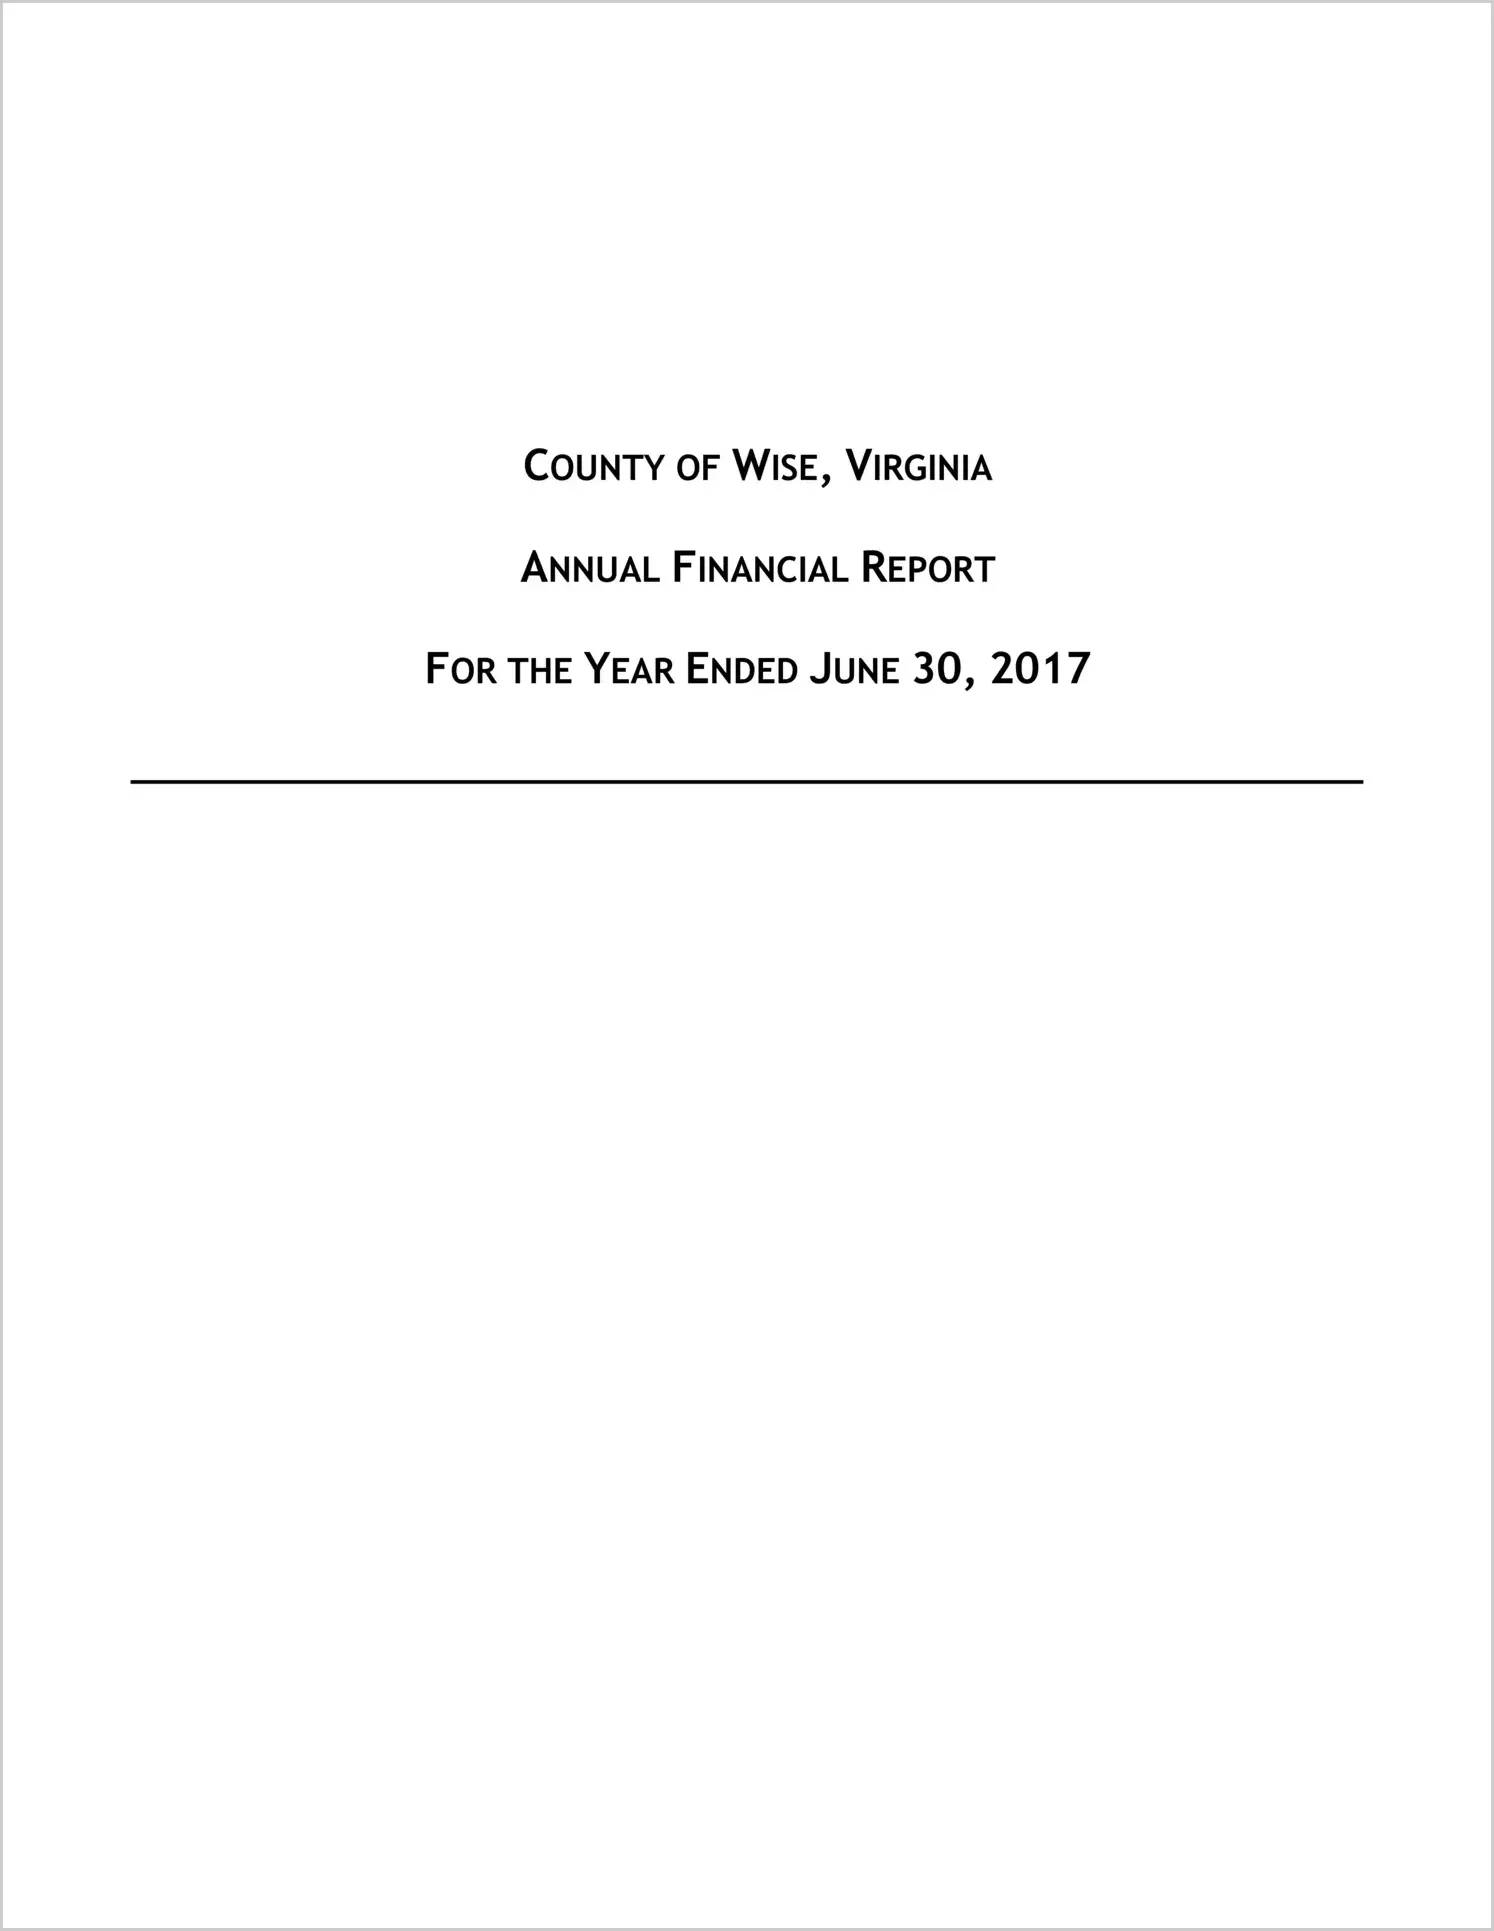 2017 Annual Financial Report for County of Wise